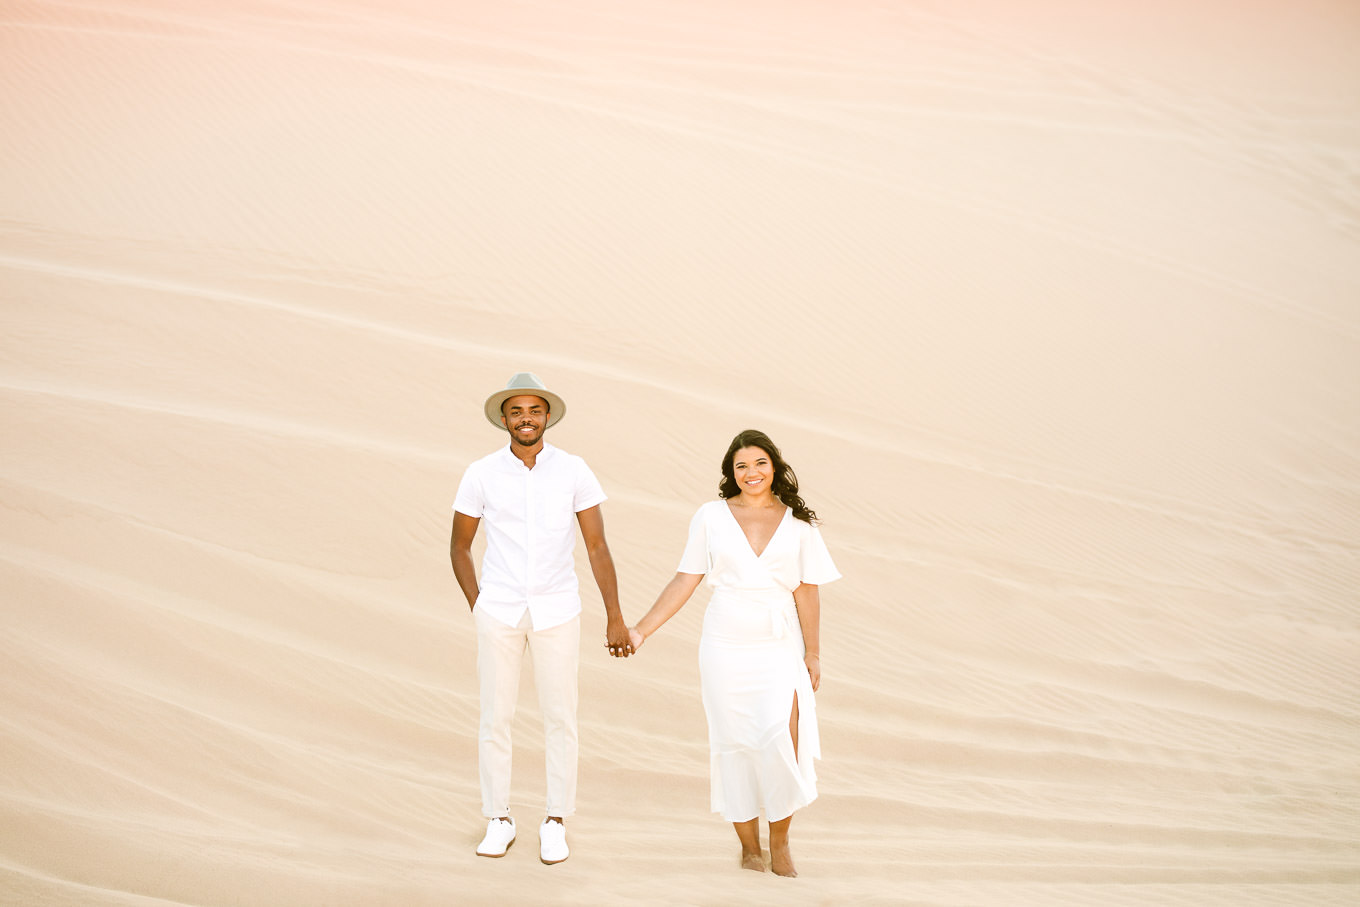 All white outfits for engagement session | California Sand Dunes engagement session | Colorful Palm Springs wedding photography | #palmspringsphotographer #sanddunes #engagementsession #southerncalifornia  Source: Mary Costa Photography | Los Angeles